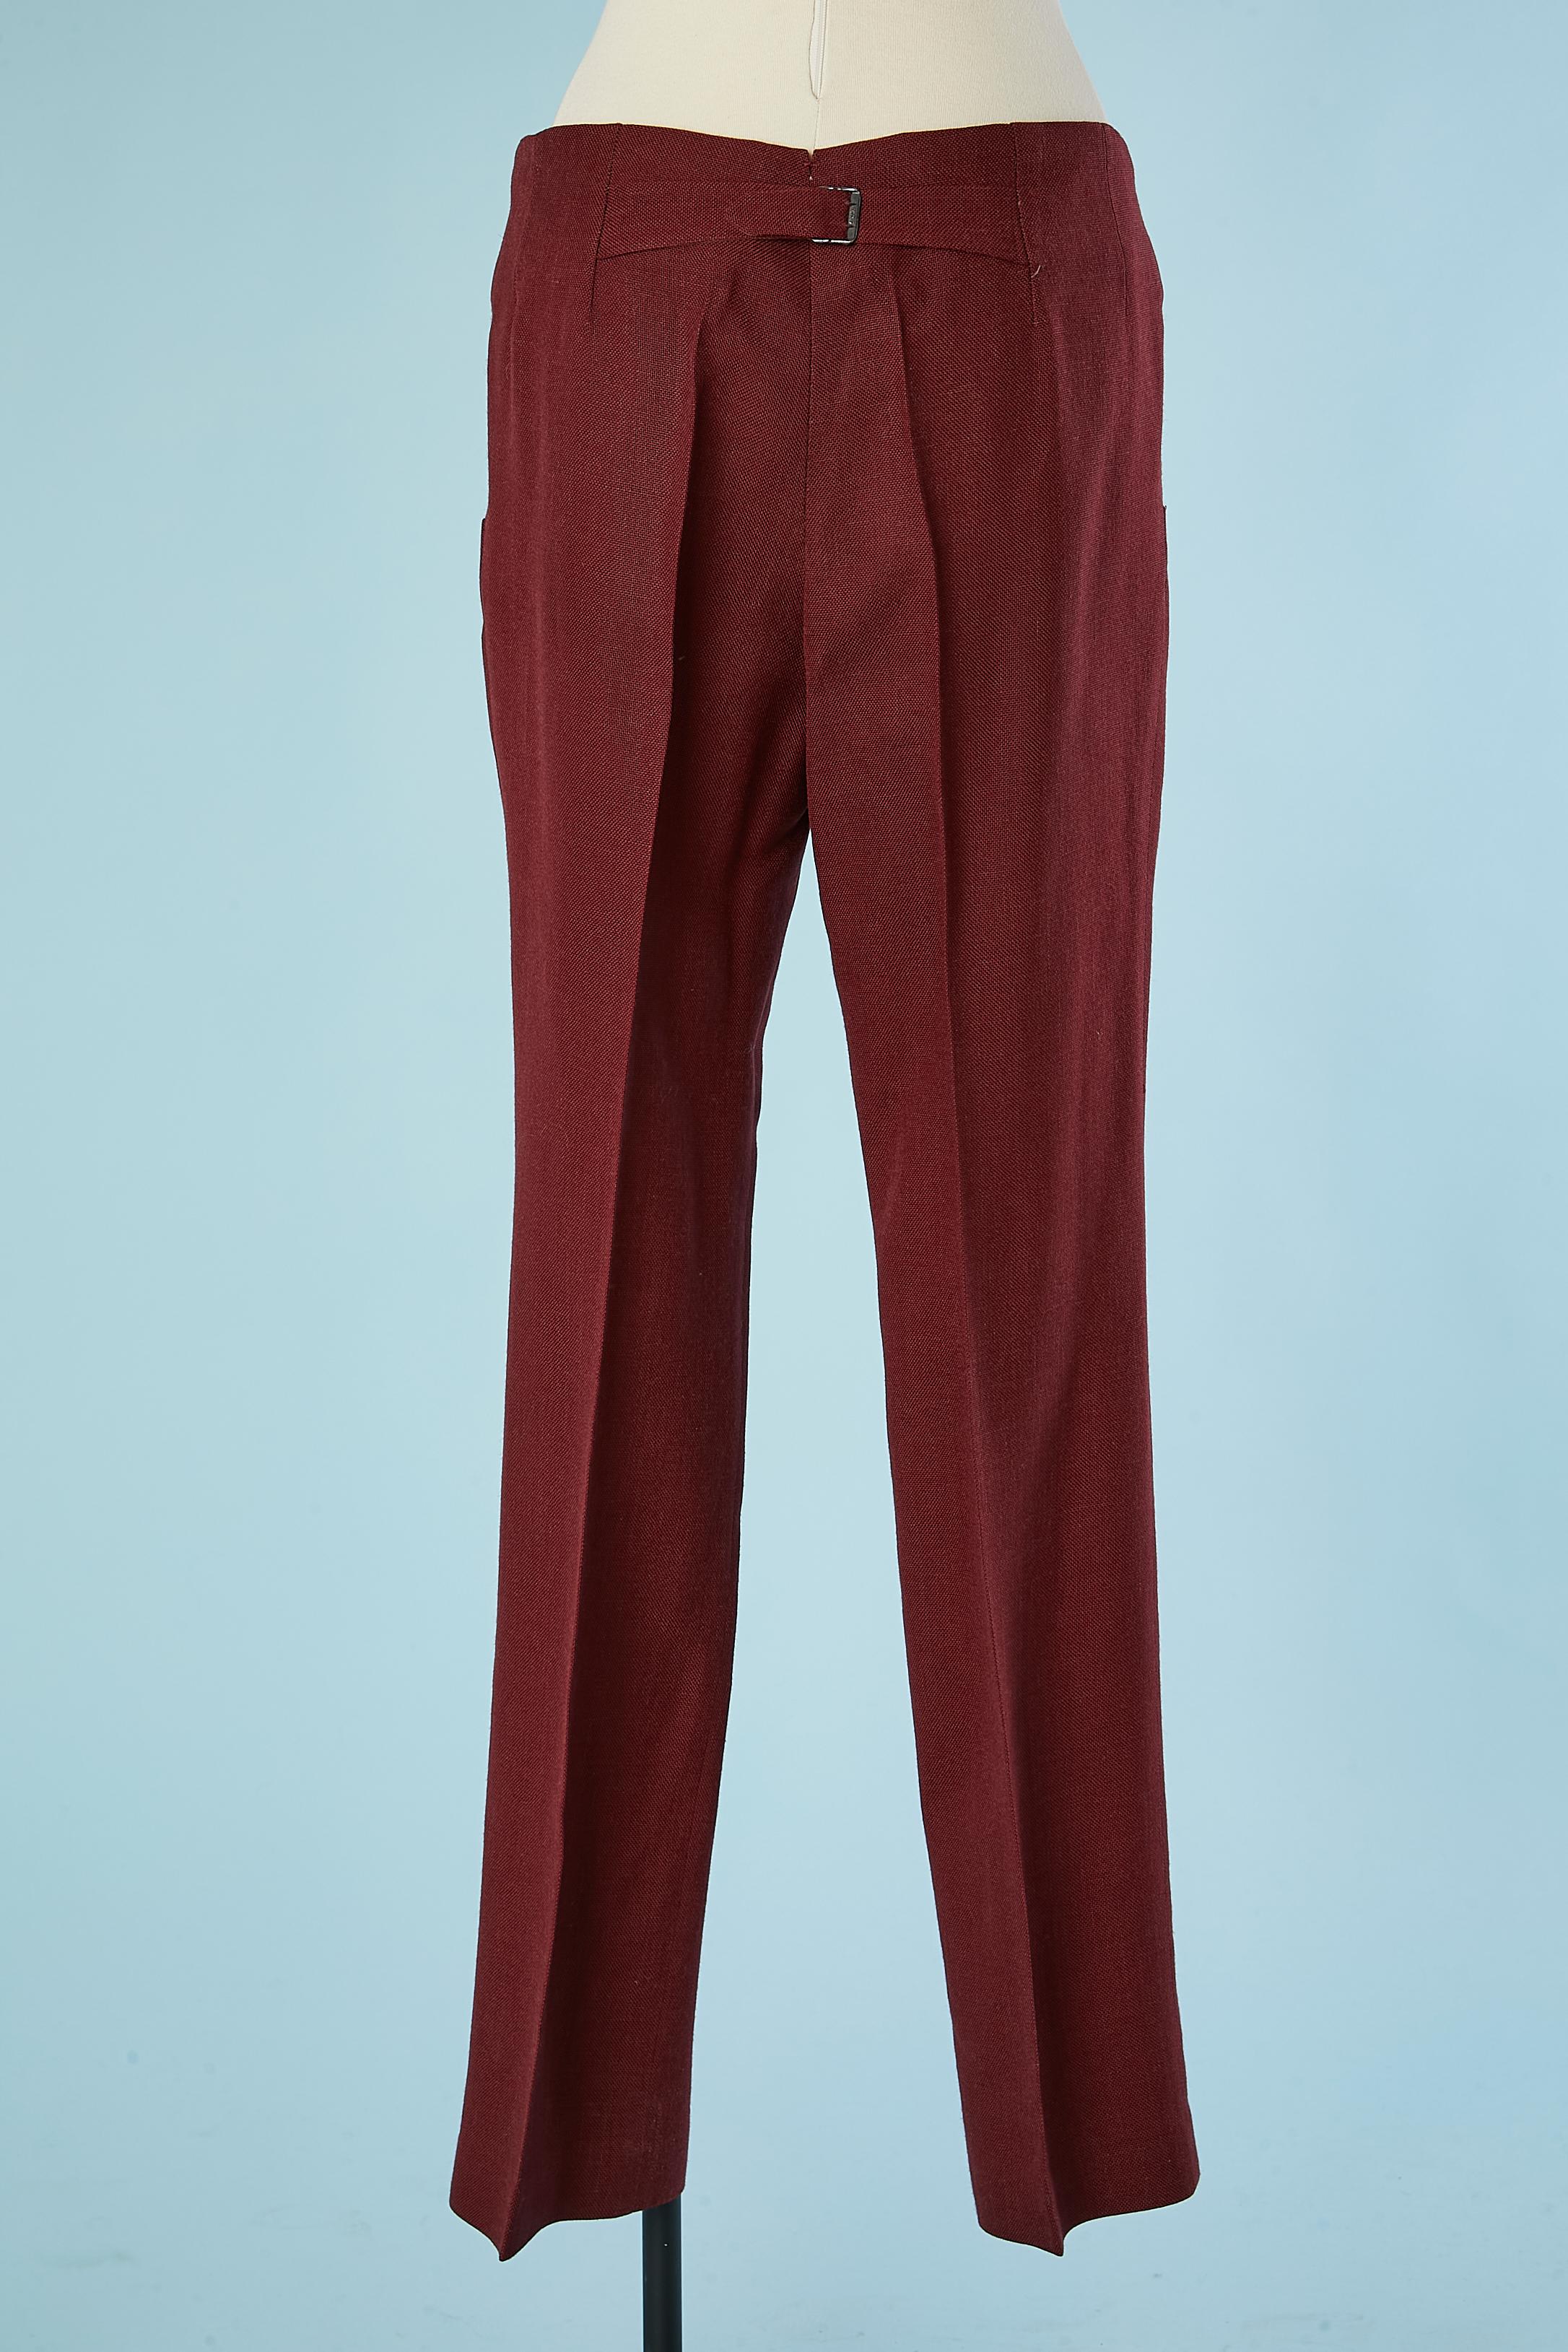 Burgundy linen and acrylic high-waisted trouser Pierre Cardin  In Excellent Condition For Sale In Saint-Ouen-Sur-Seine, FR